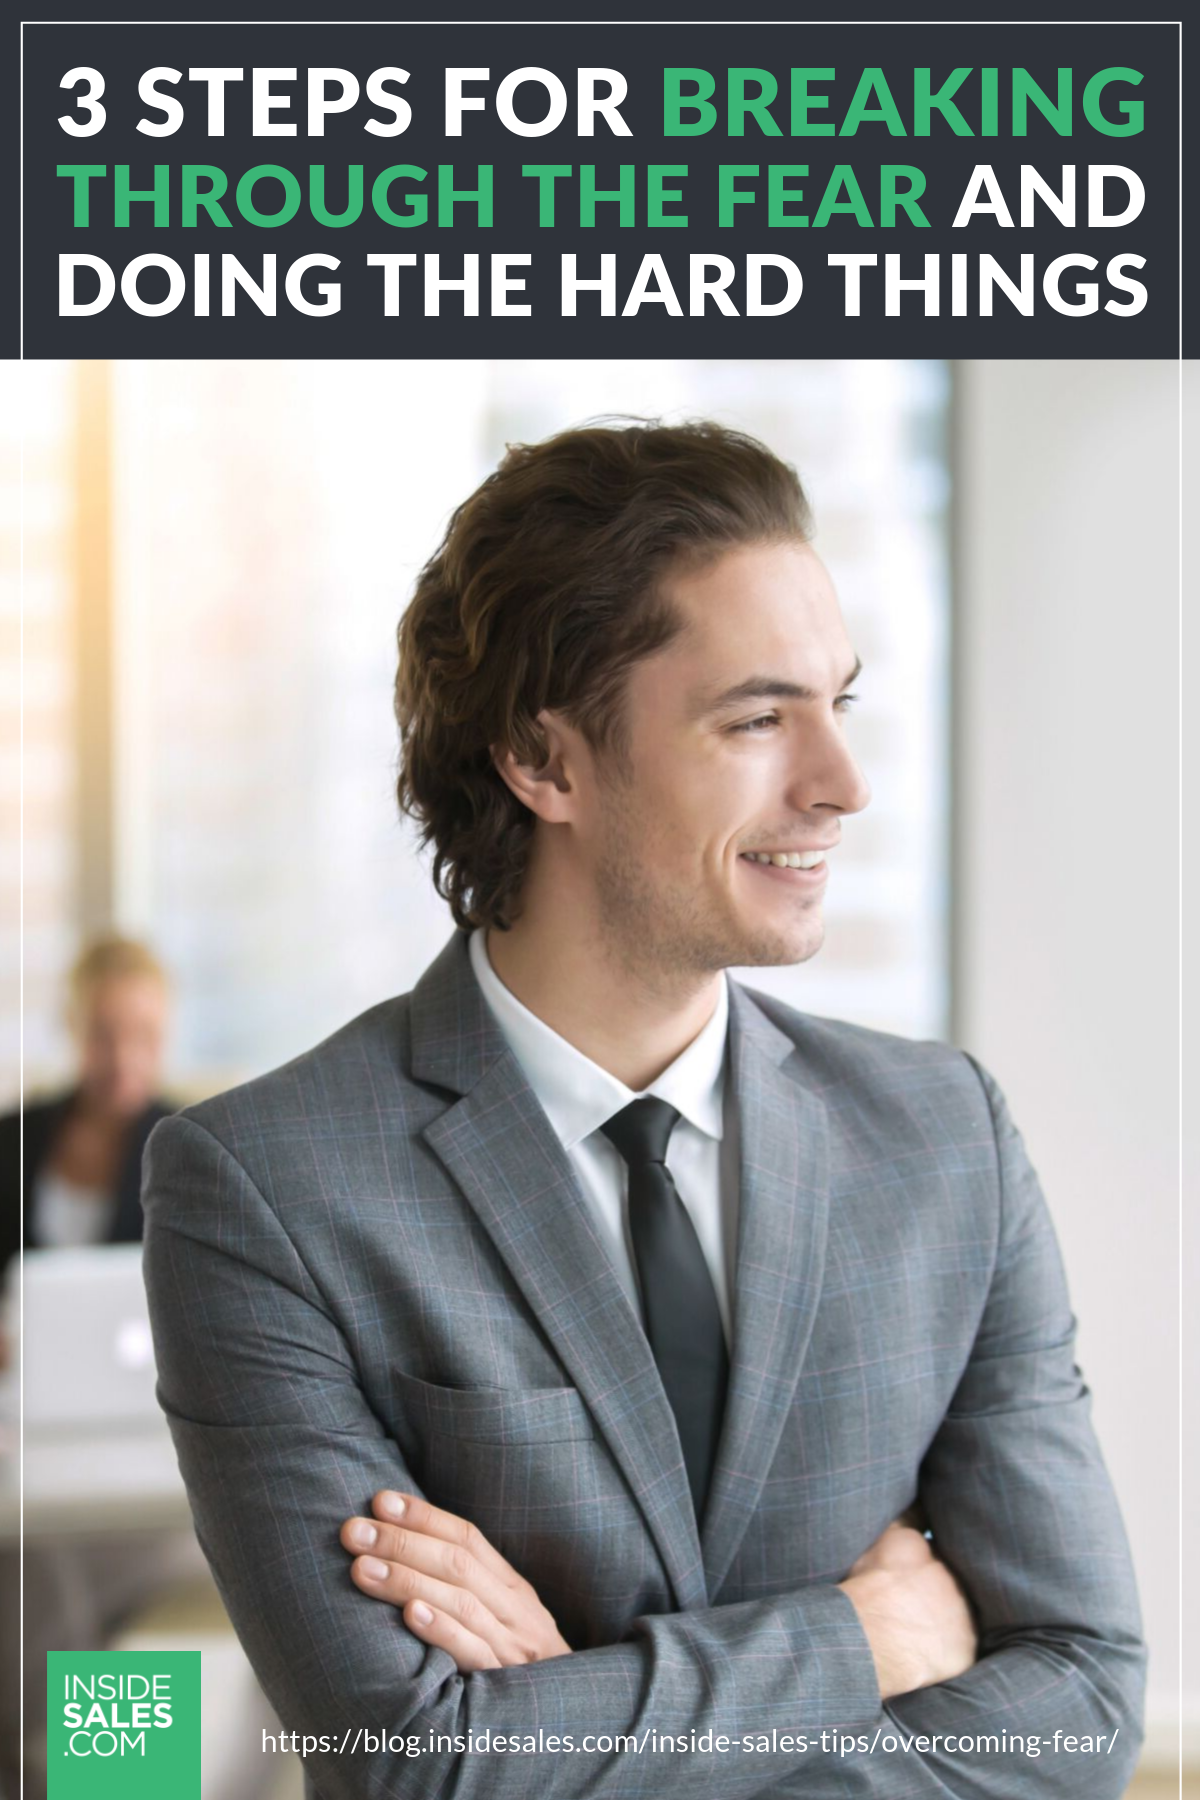 Three Steps For Breaking Through The Fear And Doing The Hard Things https://resources.insidesales.com/blog/inside-sales-tips/overcoming-fear/